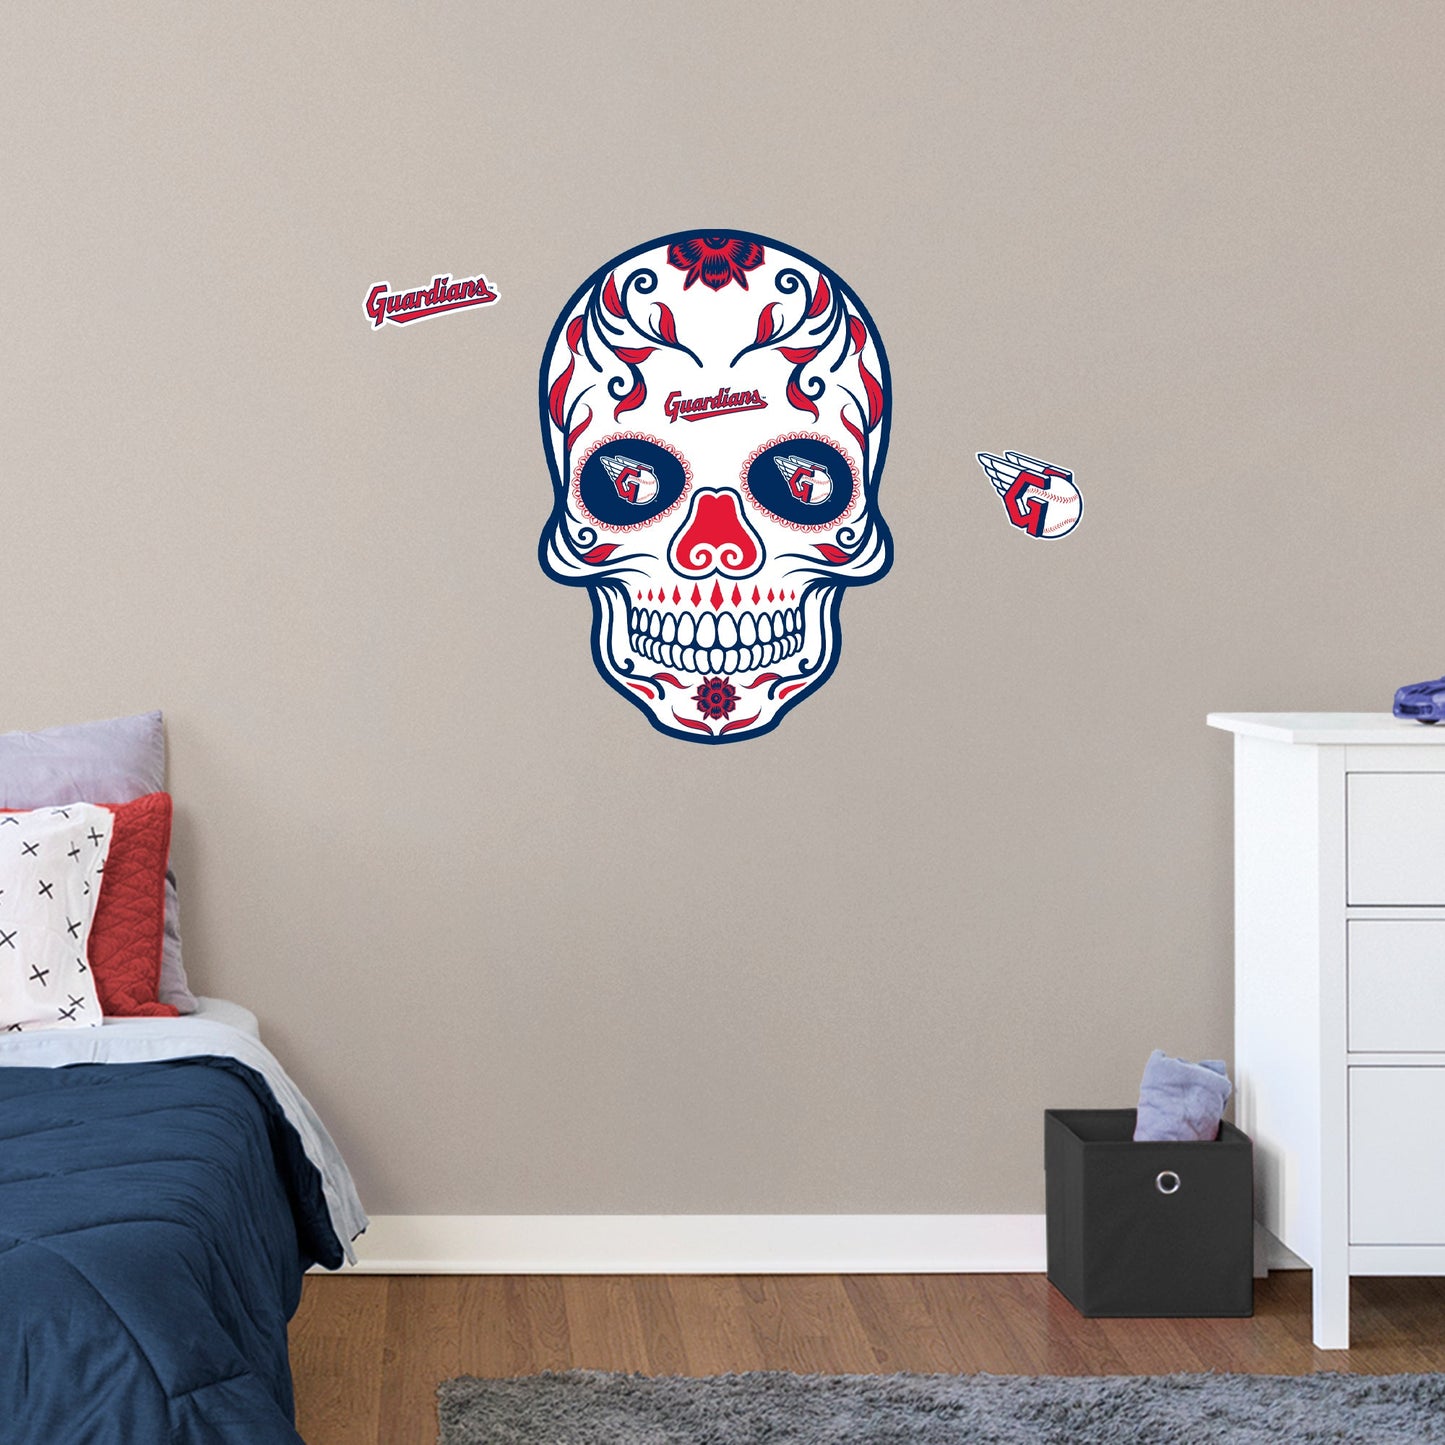 Cleveland Guardians: Skull - Officially Licensed MLB Removable Adhesive Decal